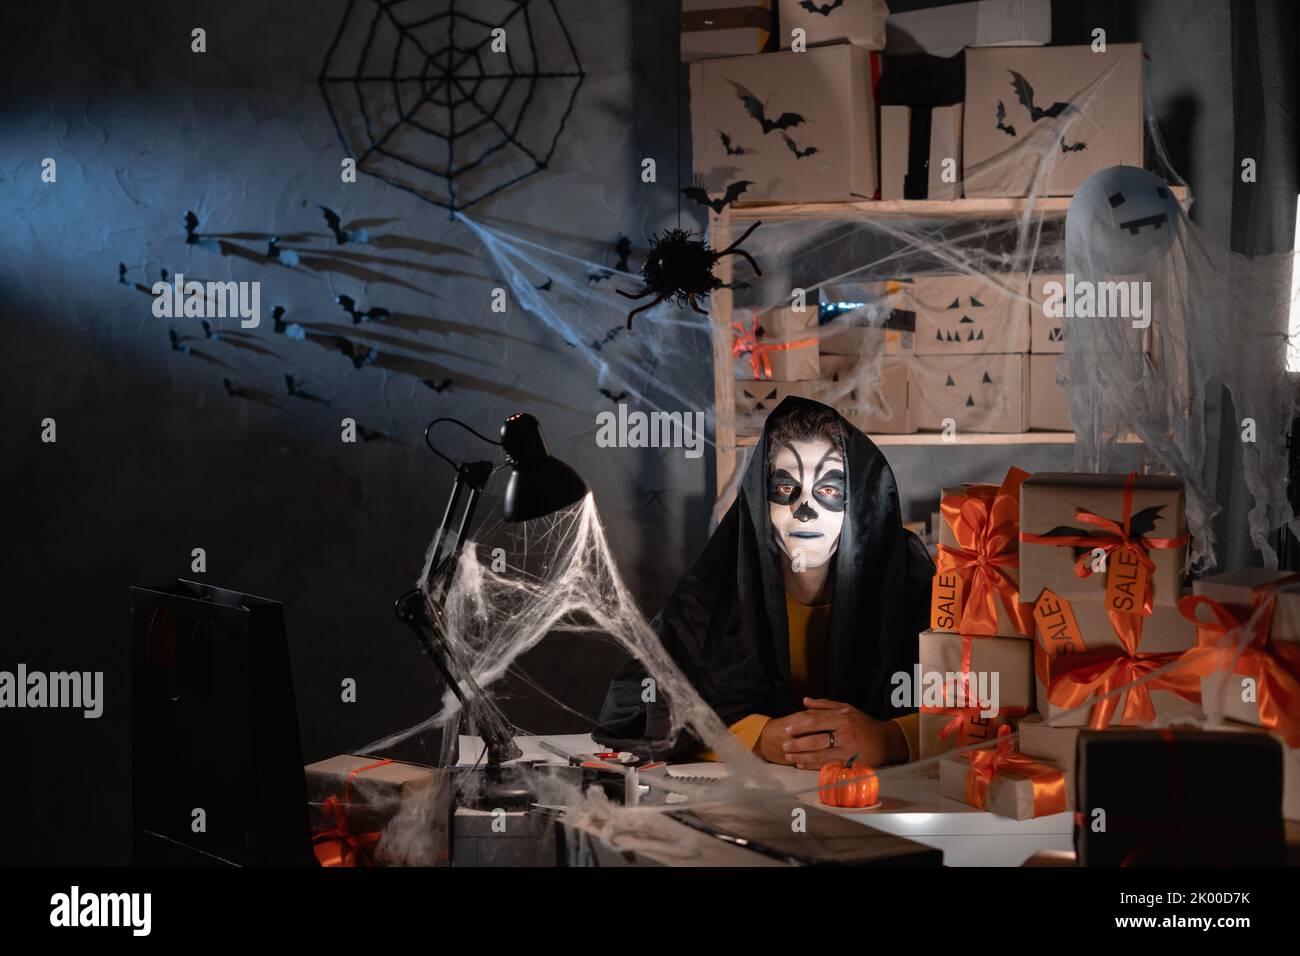 Small and medium business start-up entrepreneur, male entrepreneur with skull make-up sits among boxes with cobwebs. Big sale concept for halloween Stock Photo